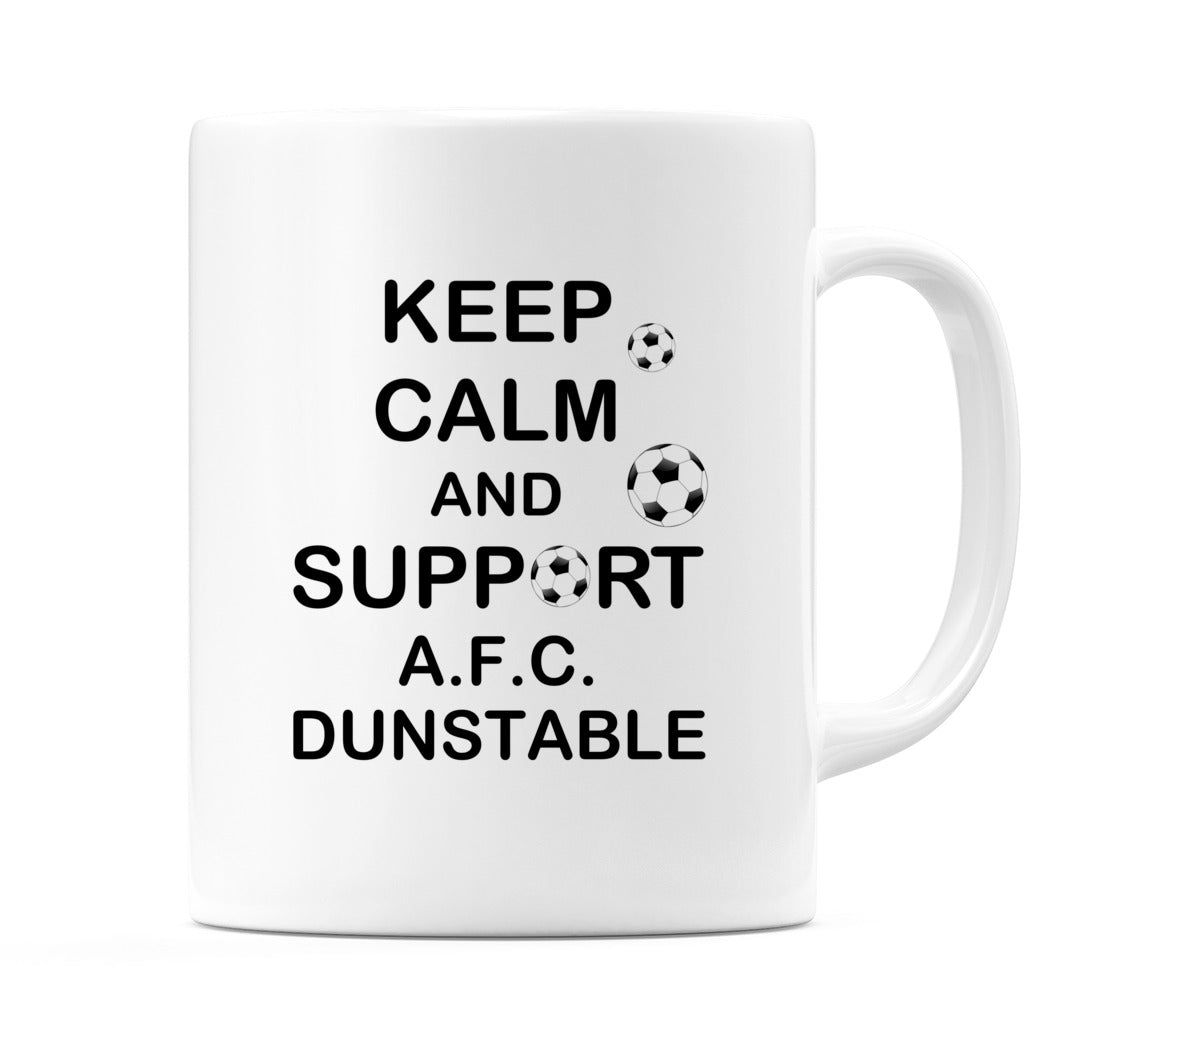 Keep Calm And Support A.F.C. Dunstable Mug